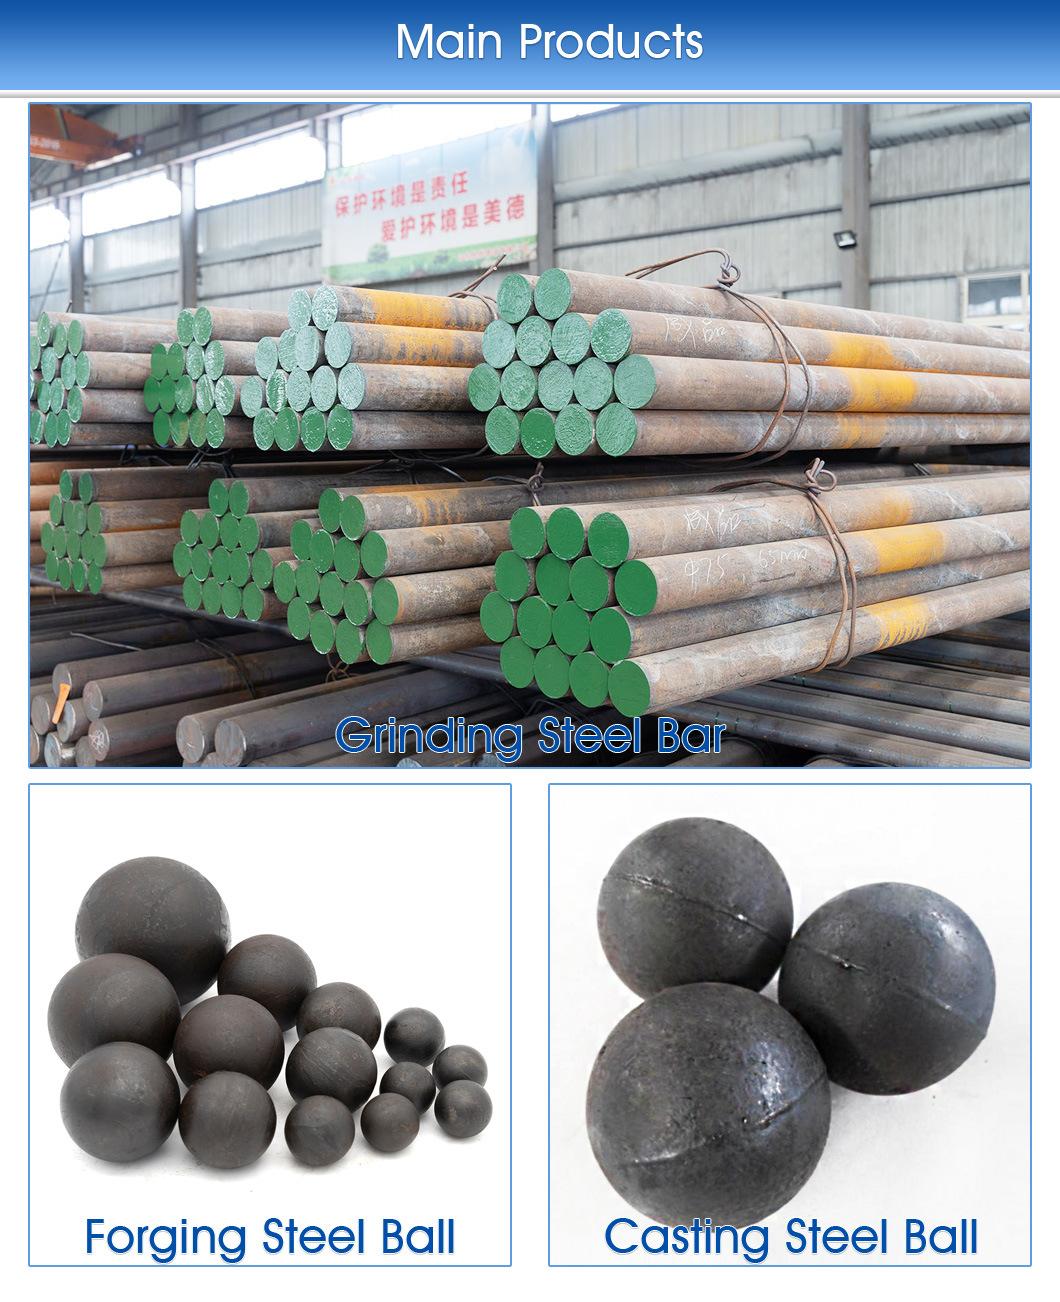 2020 Hot Sale Low Abrasion Forged Steel Grinding Ball for Milling and Grinding Made in China